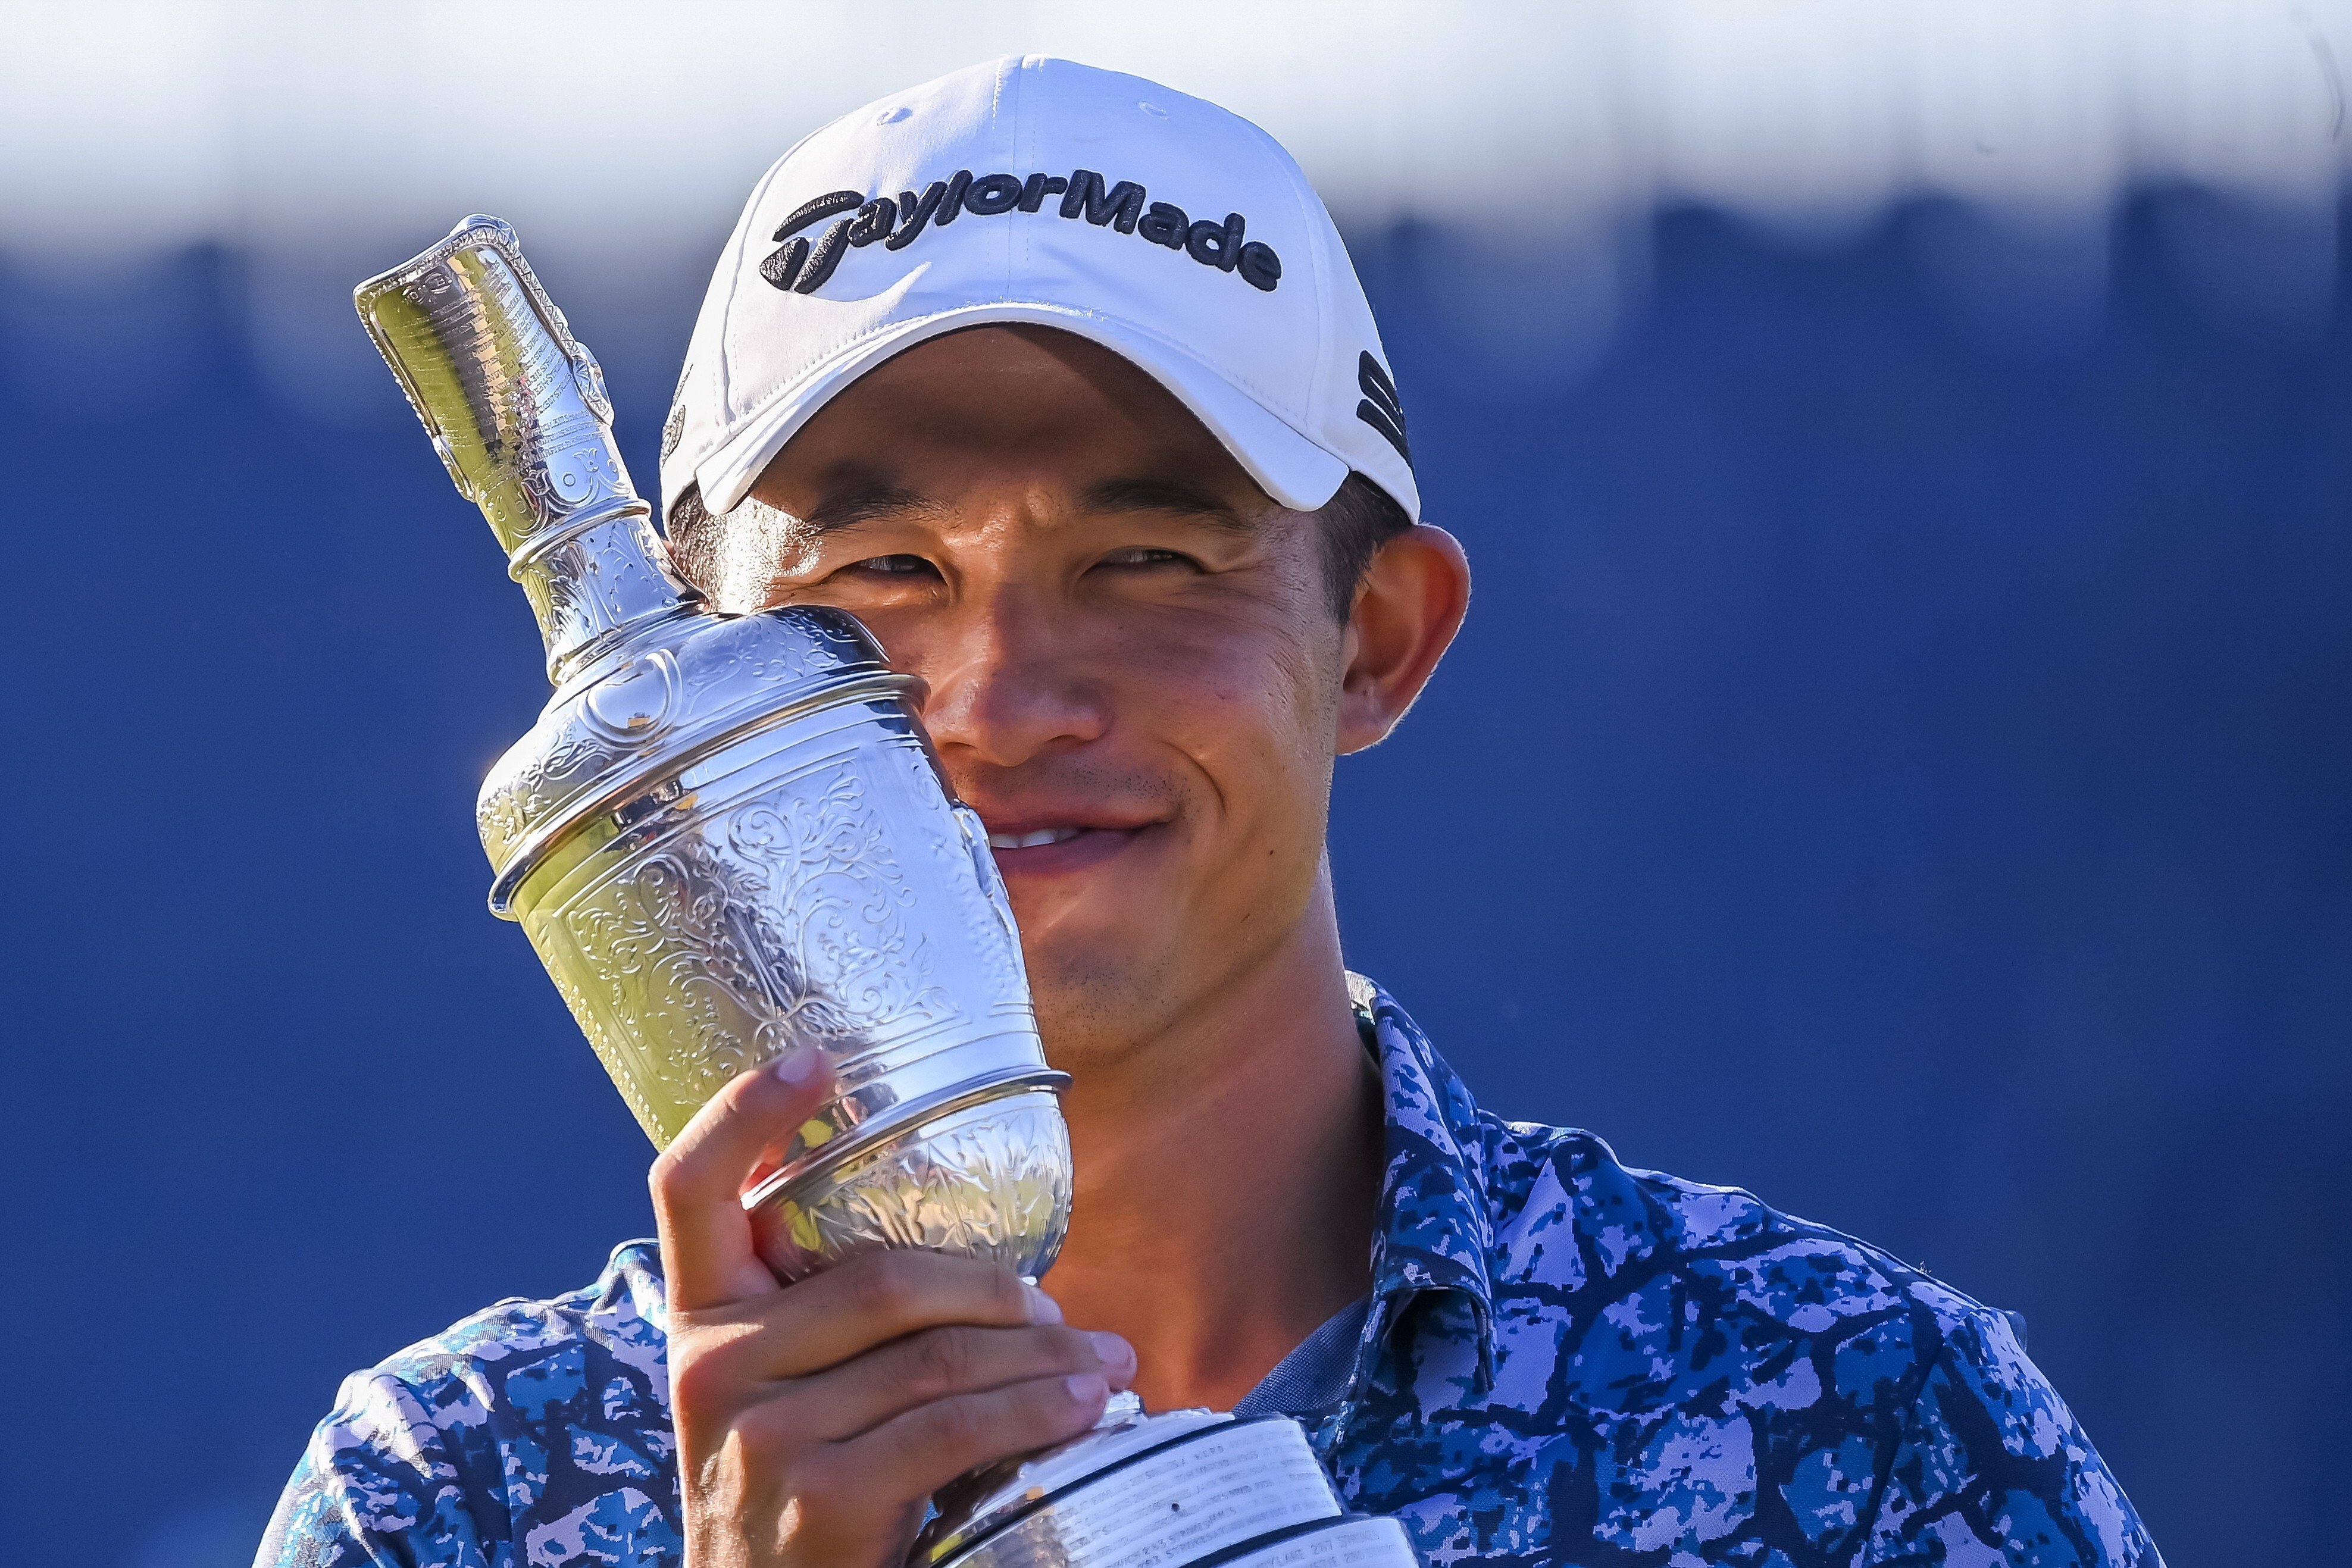 Collin Morikawa of the US wins The Open 2021 golf championship at Royal St George’s golf course in Sandwich, Kent, Britain on Sunday. Photo: EPA-EFE